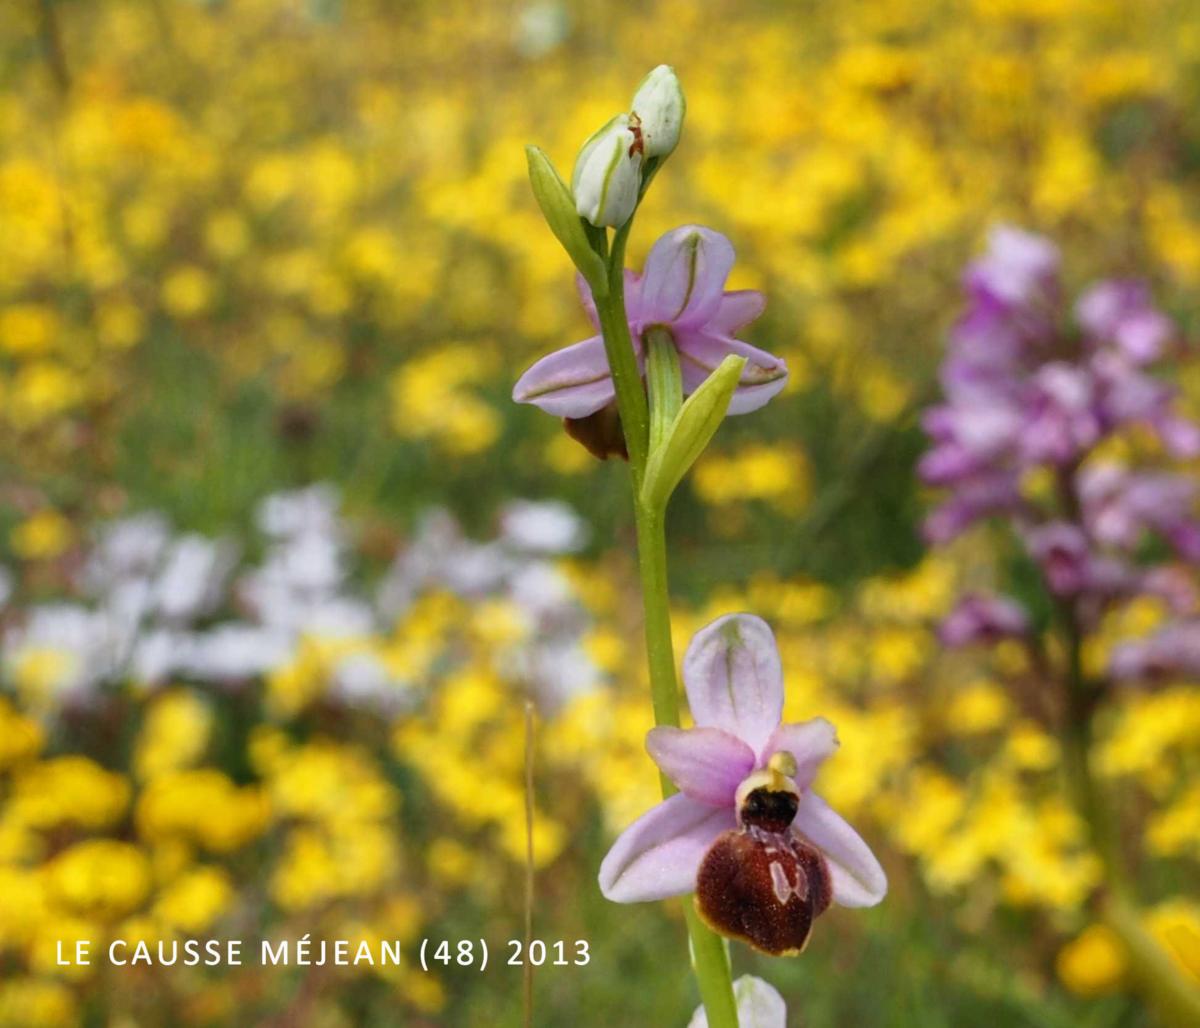 Ophrys of Aveyron flower